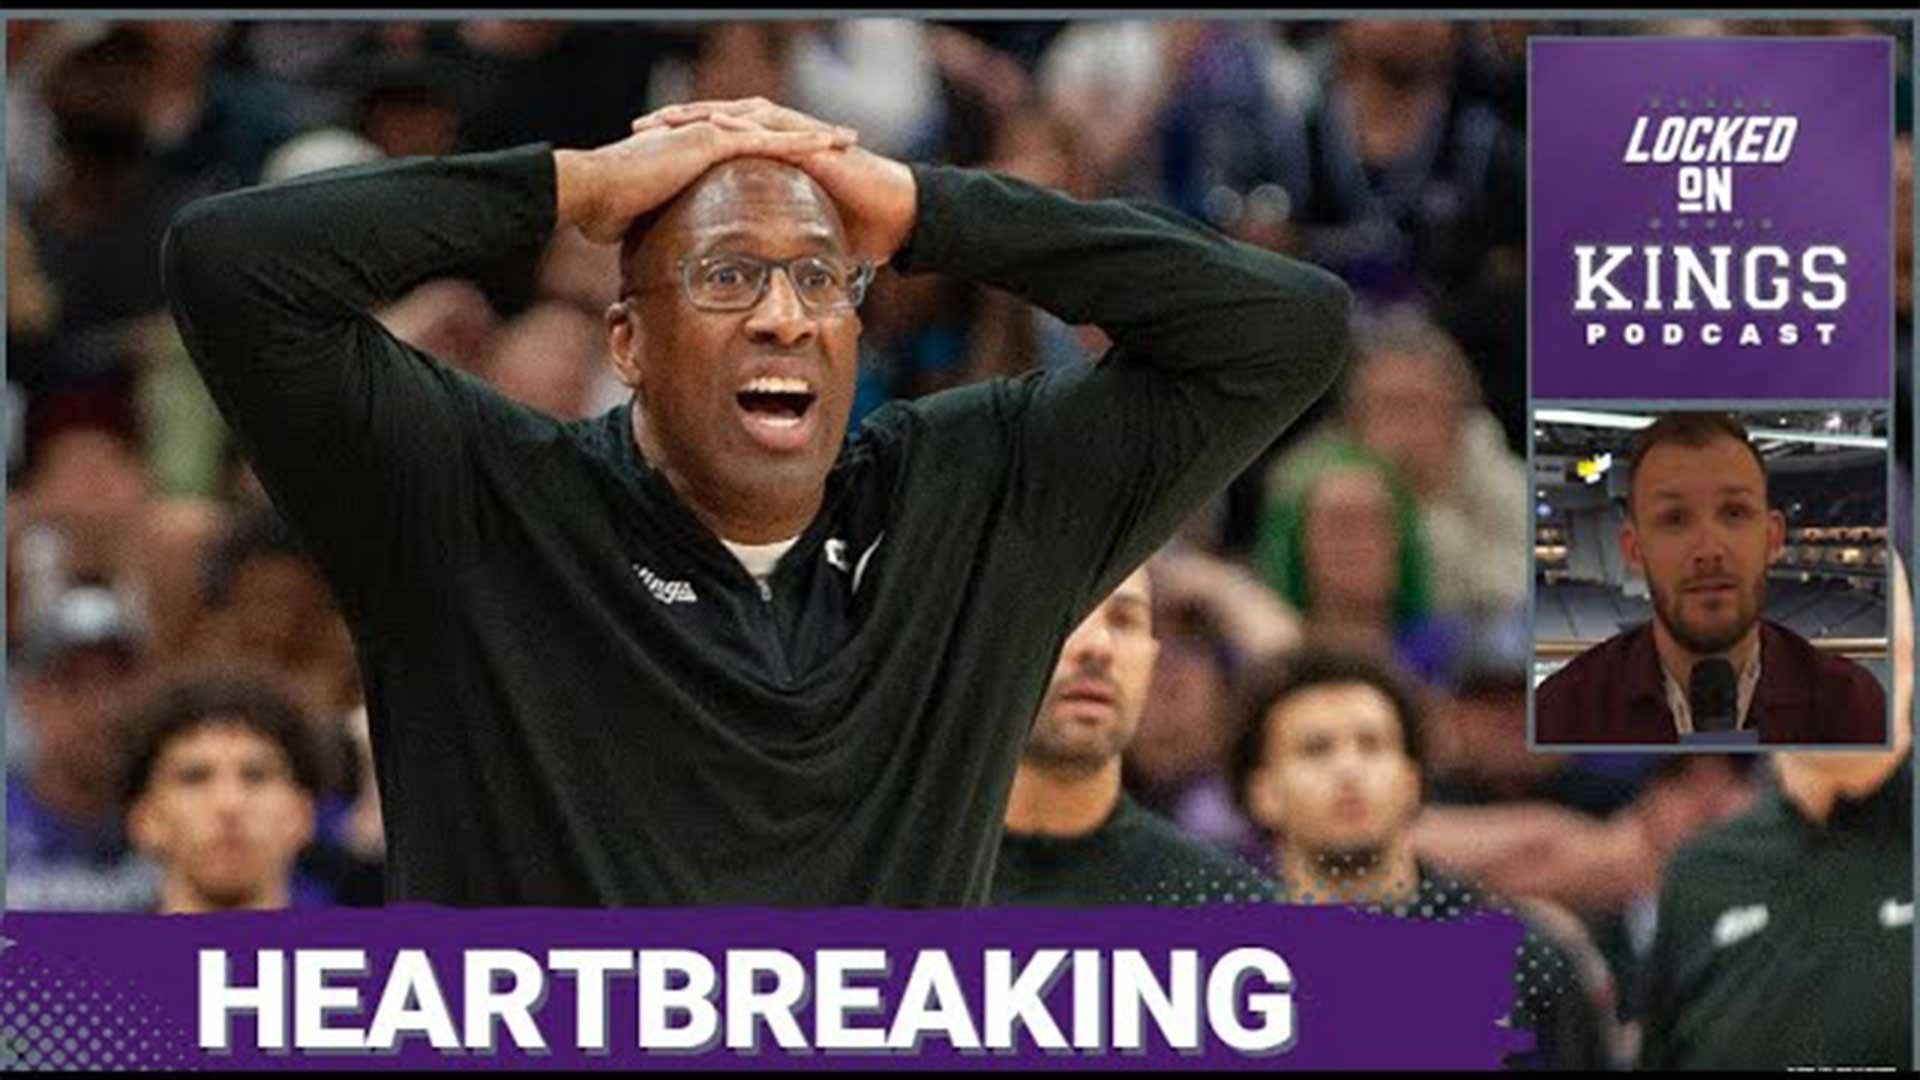 Matt George reacts to the Sacramento Kings heartbreaking 108-107 loss to the Phoenix Suns, pushing them to 9th in the West.